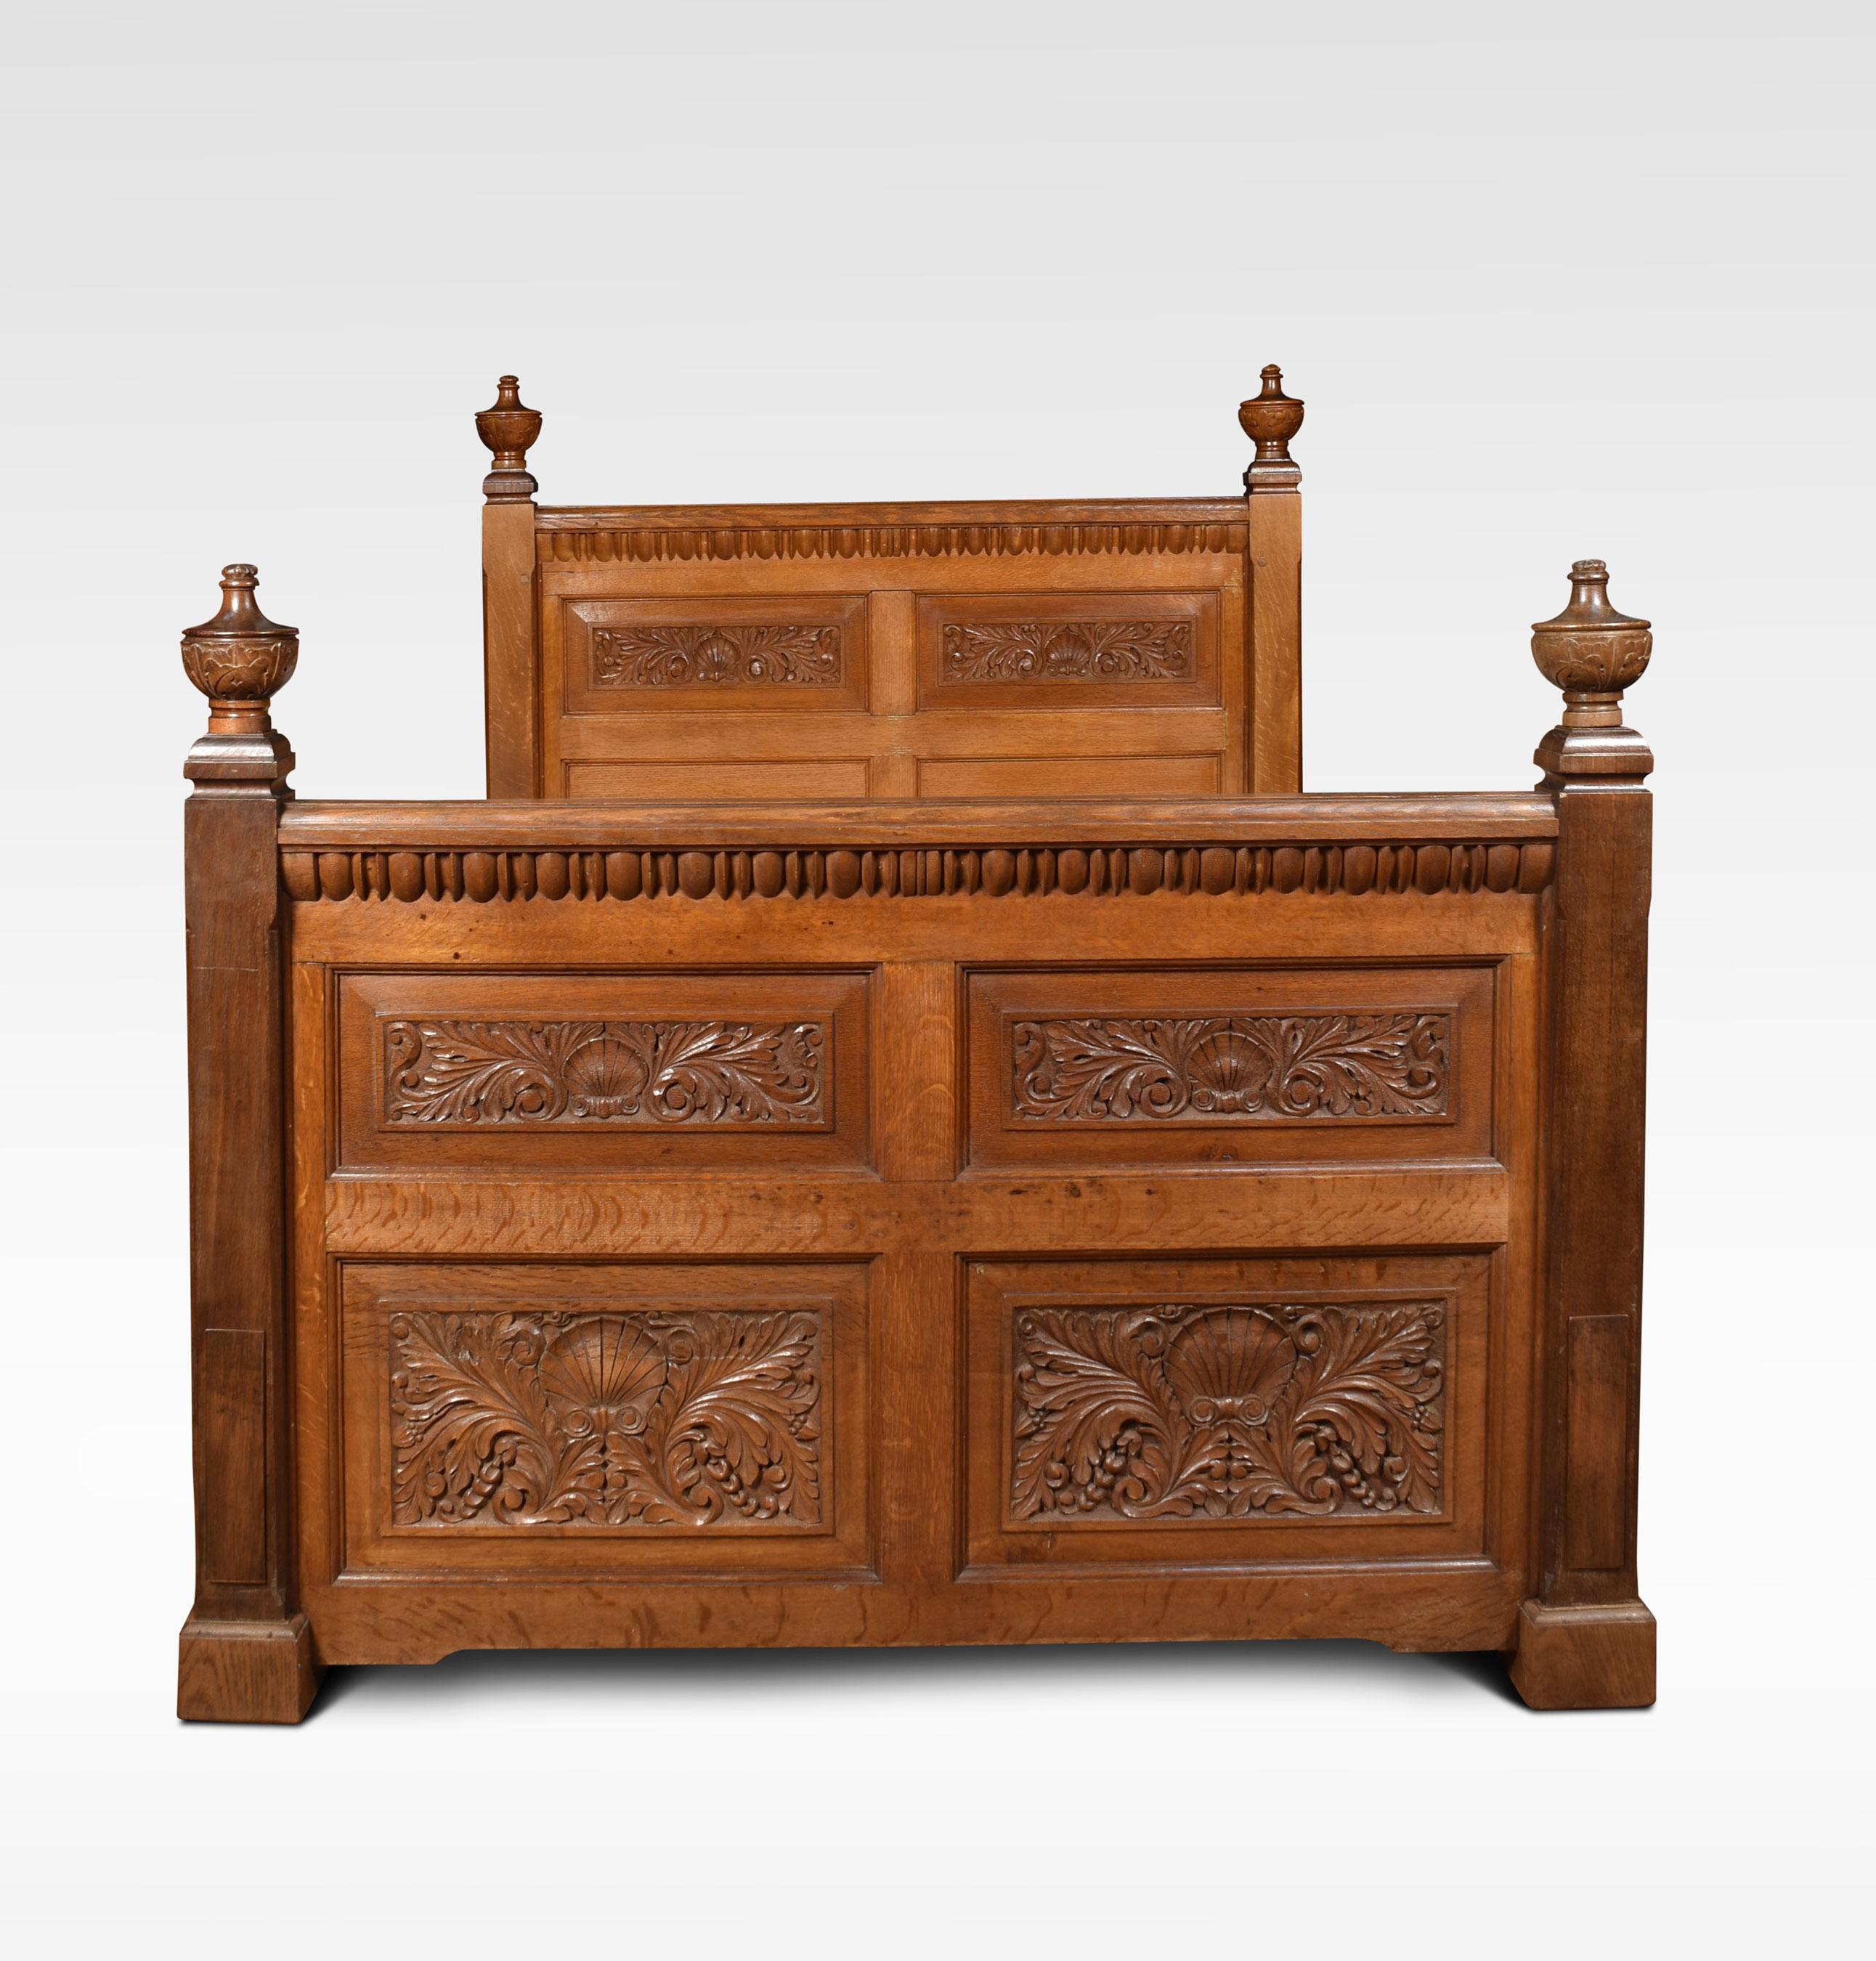 Oak bed the headboard with two carved panels within molded borders, with two plain rectangular panels below, the square uprights surmounted by leaf carved finials. the footboard with similar finials, above four heavily carved panels with central